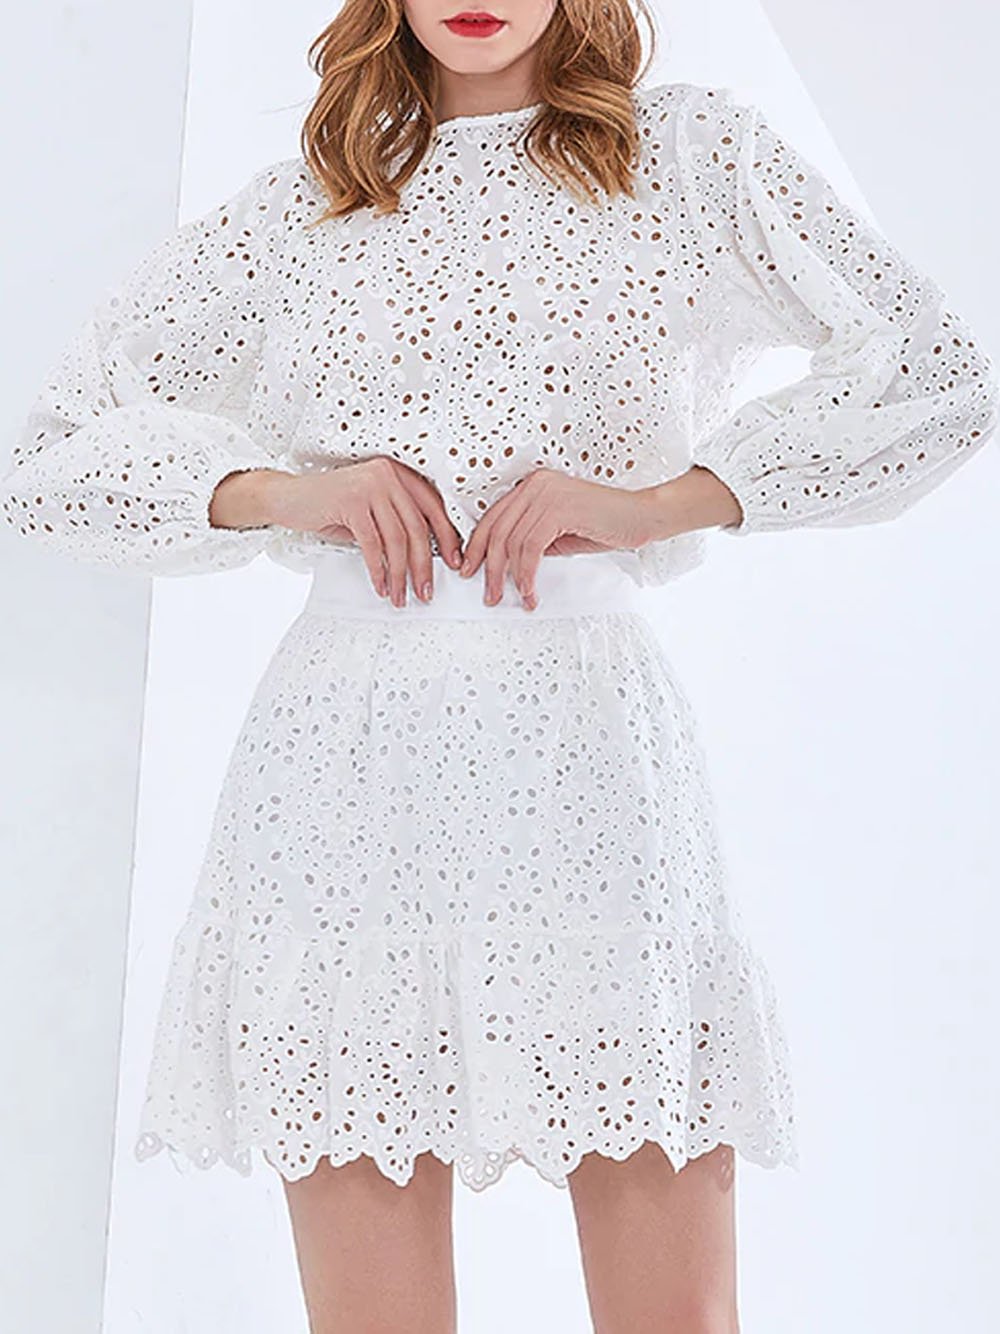 AVERY Lace Blouse & Skirt Set in White